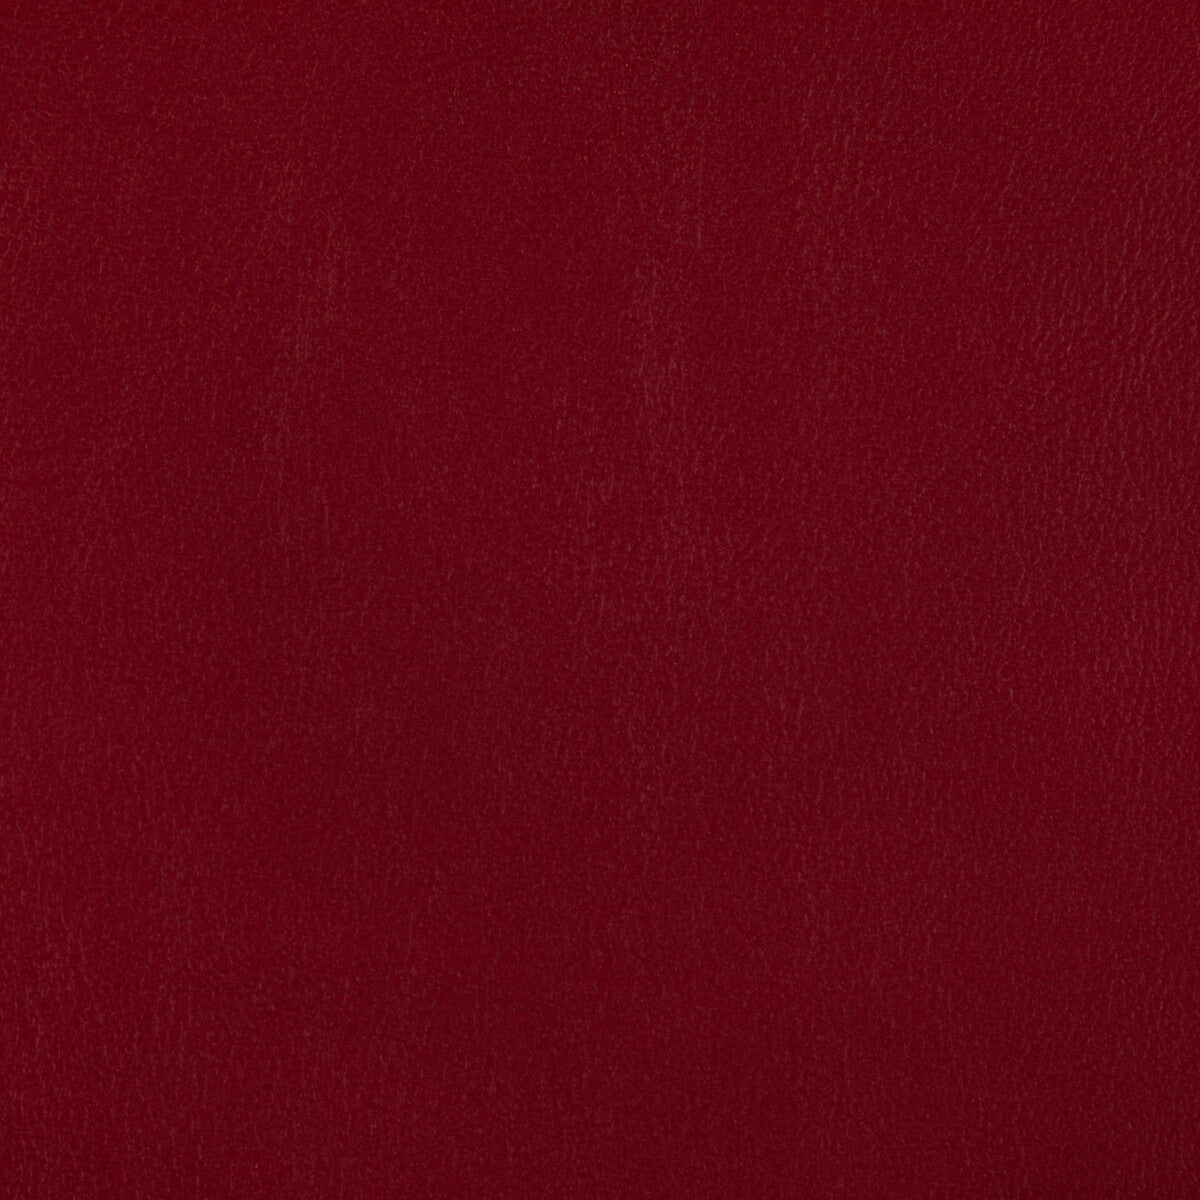 Rand fabric in cherry color - pattern RAND.19.0 - by Kravet Contract